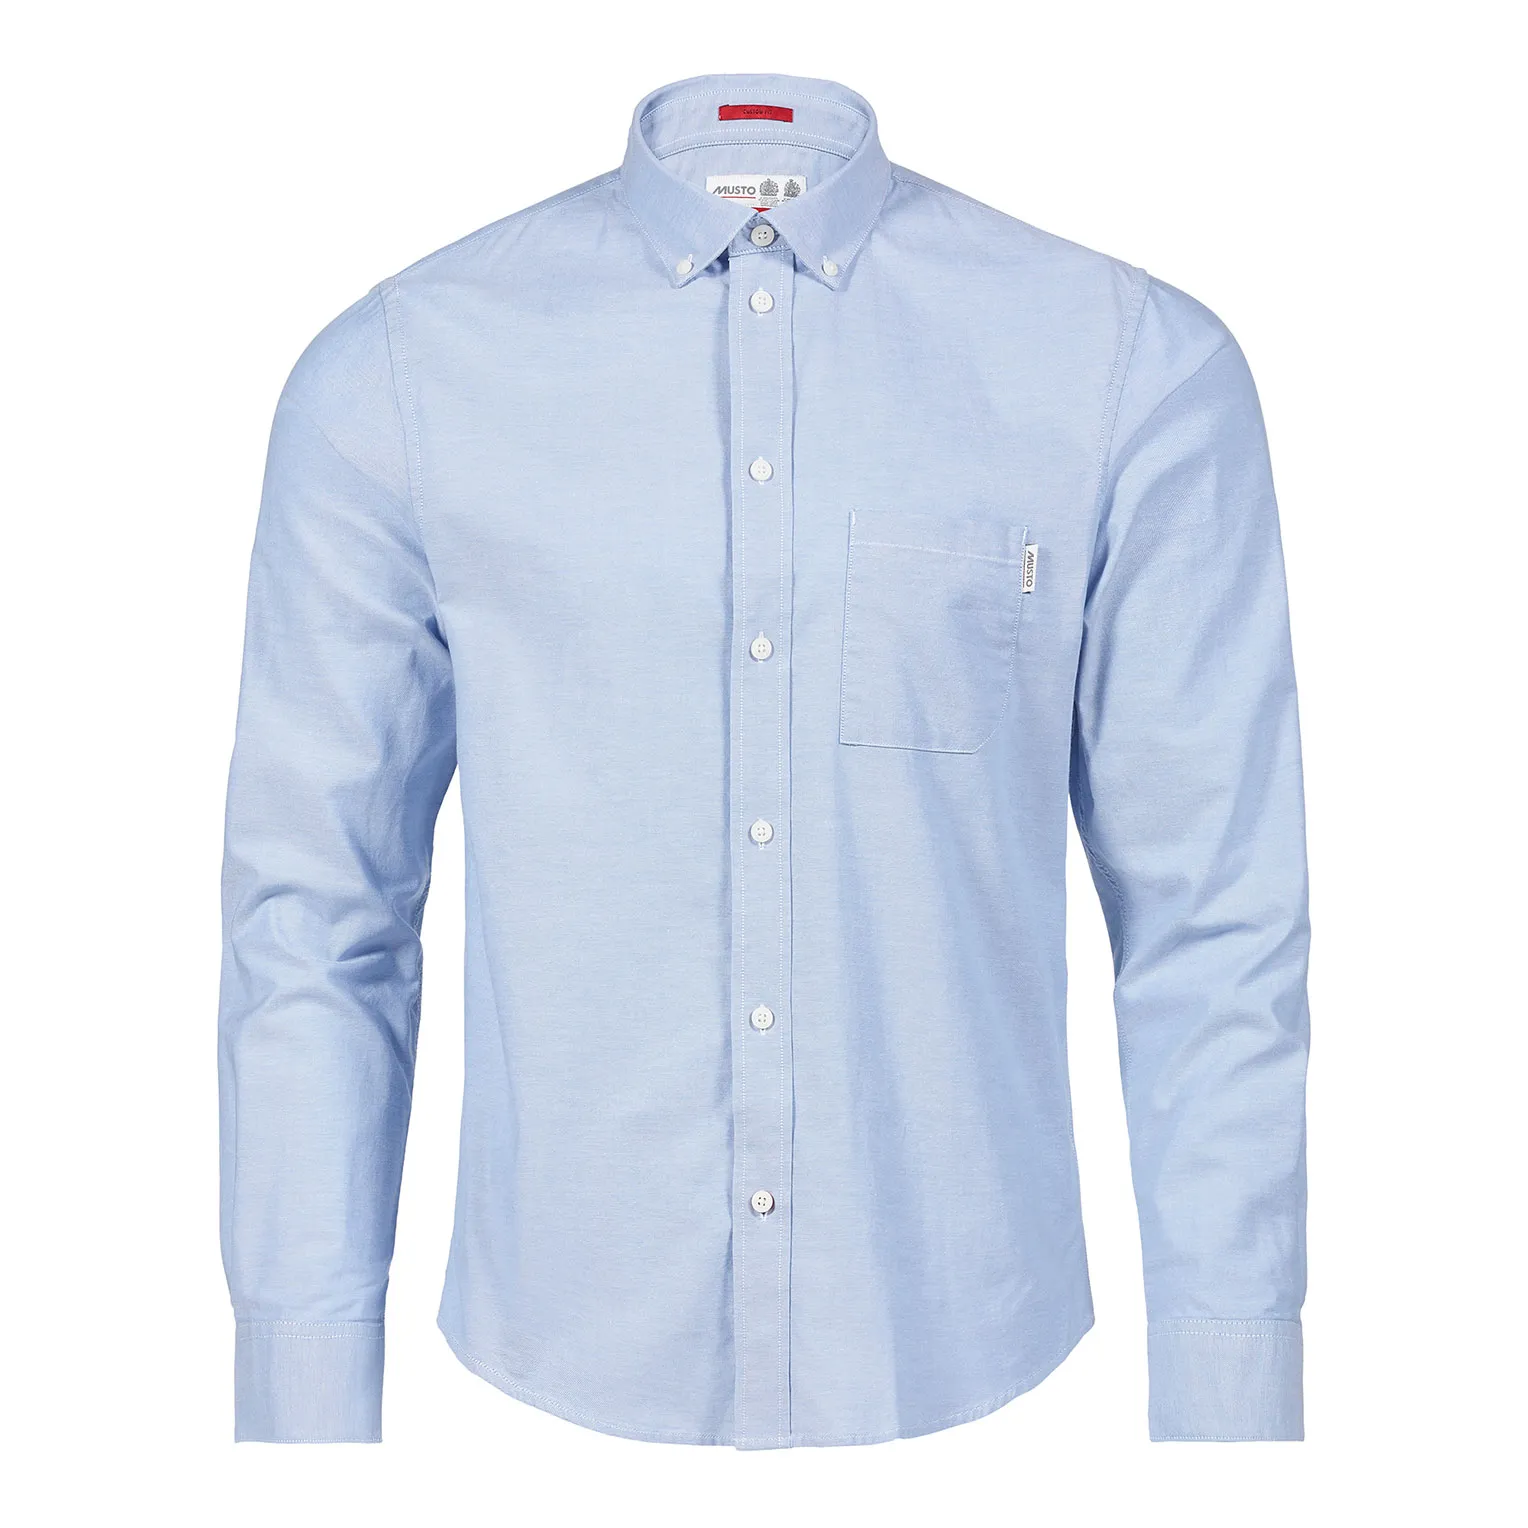 MUSTO CHEMISE OXFORD MANCHES LONGUES AIDEN